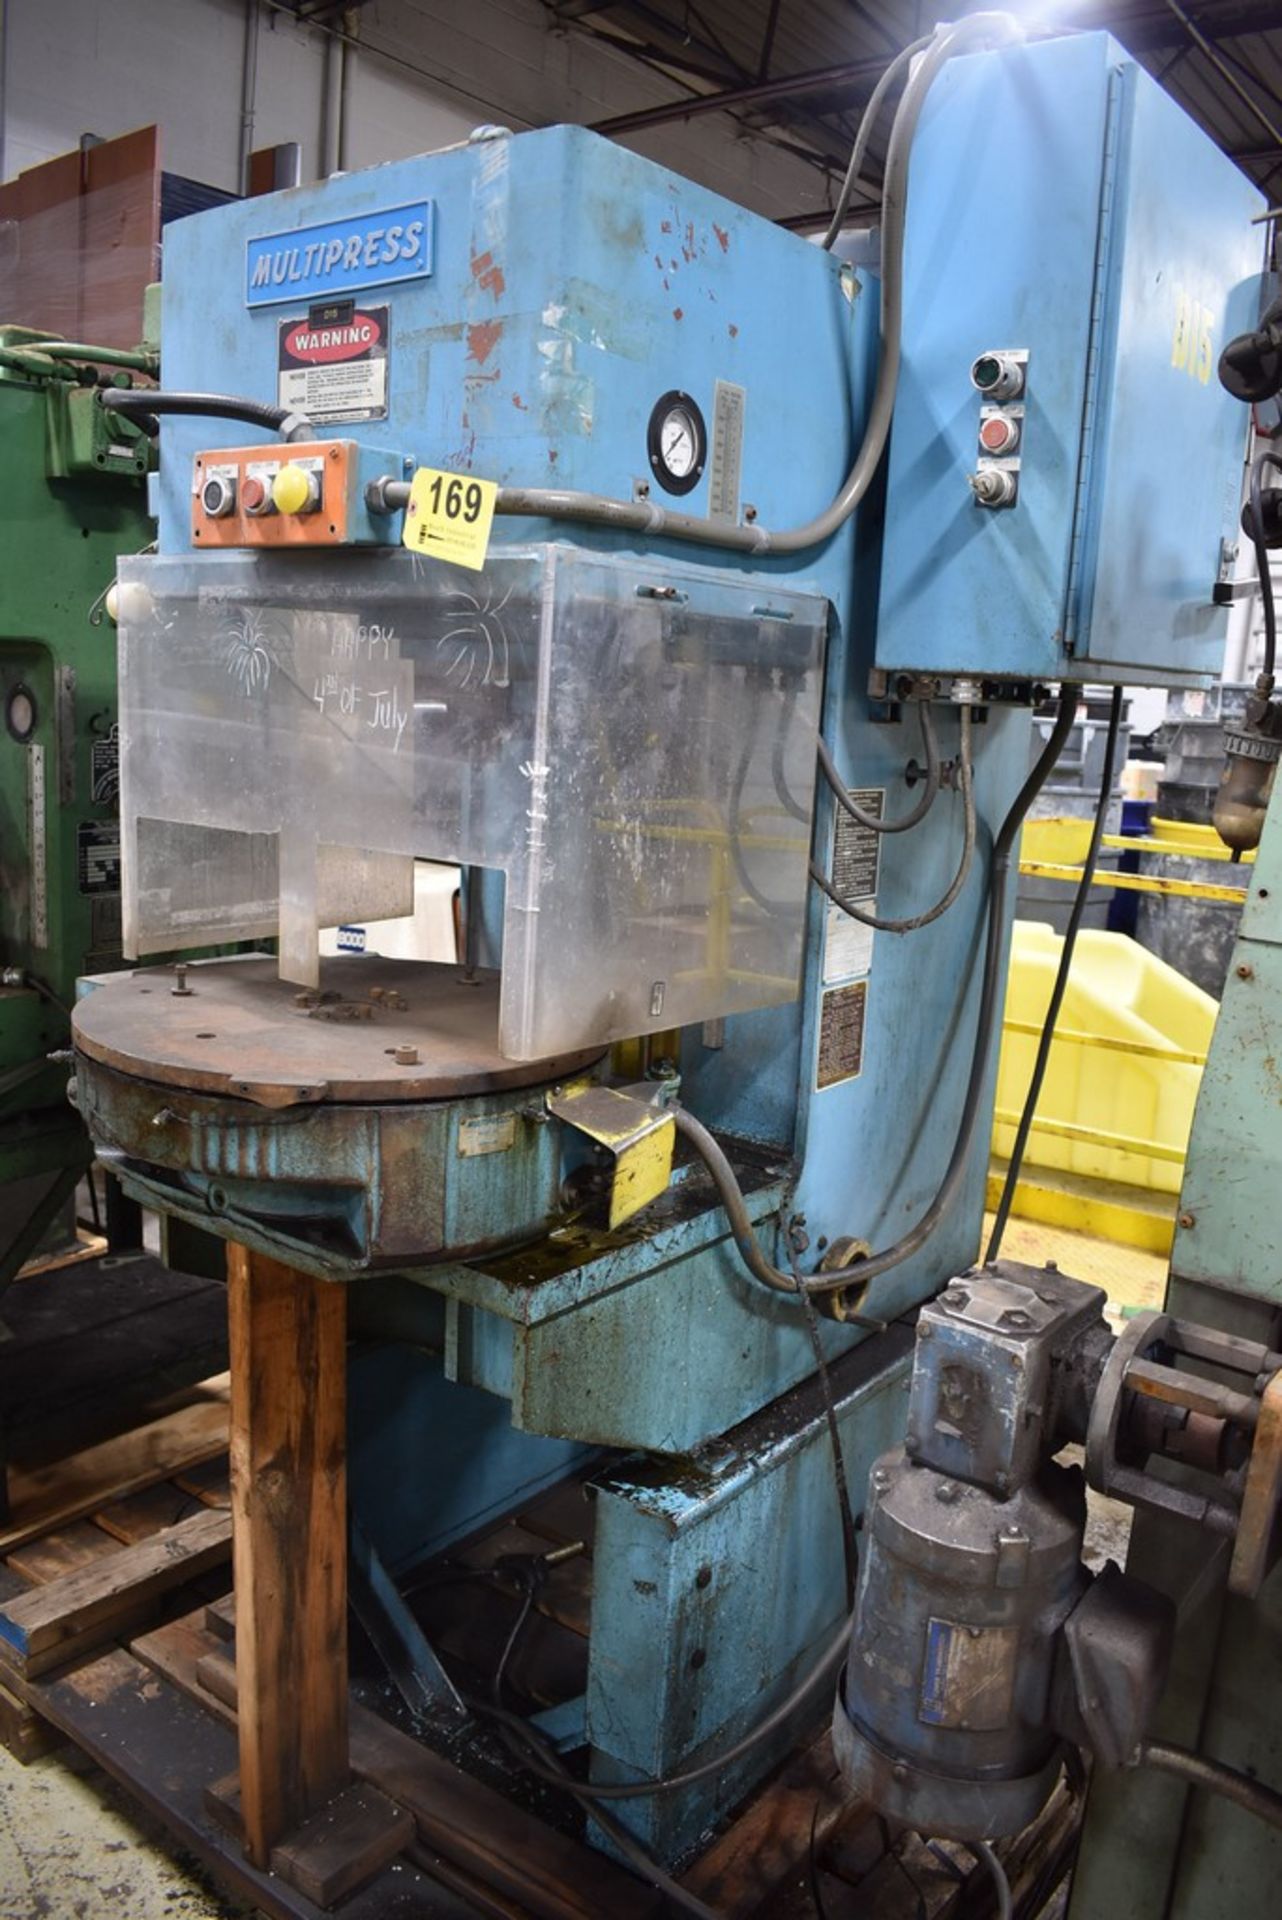 MULTIPRESS MODEL WT-100M 10 TON HYDRAULIC PRESS, WITH MODEL IT-103 INDEX TABLE, S/N 30208 - Image 2 of 8